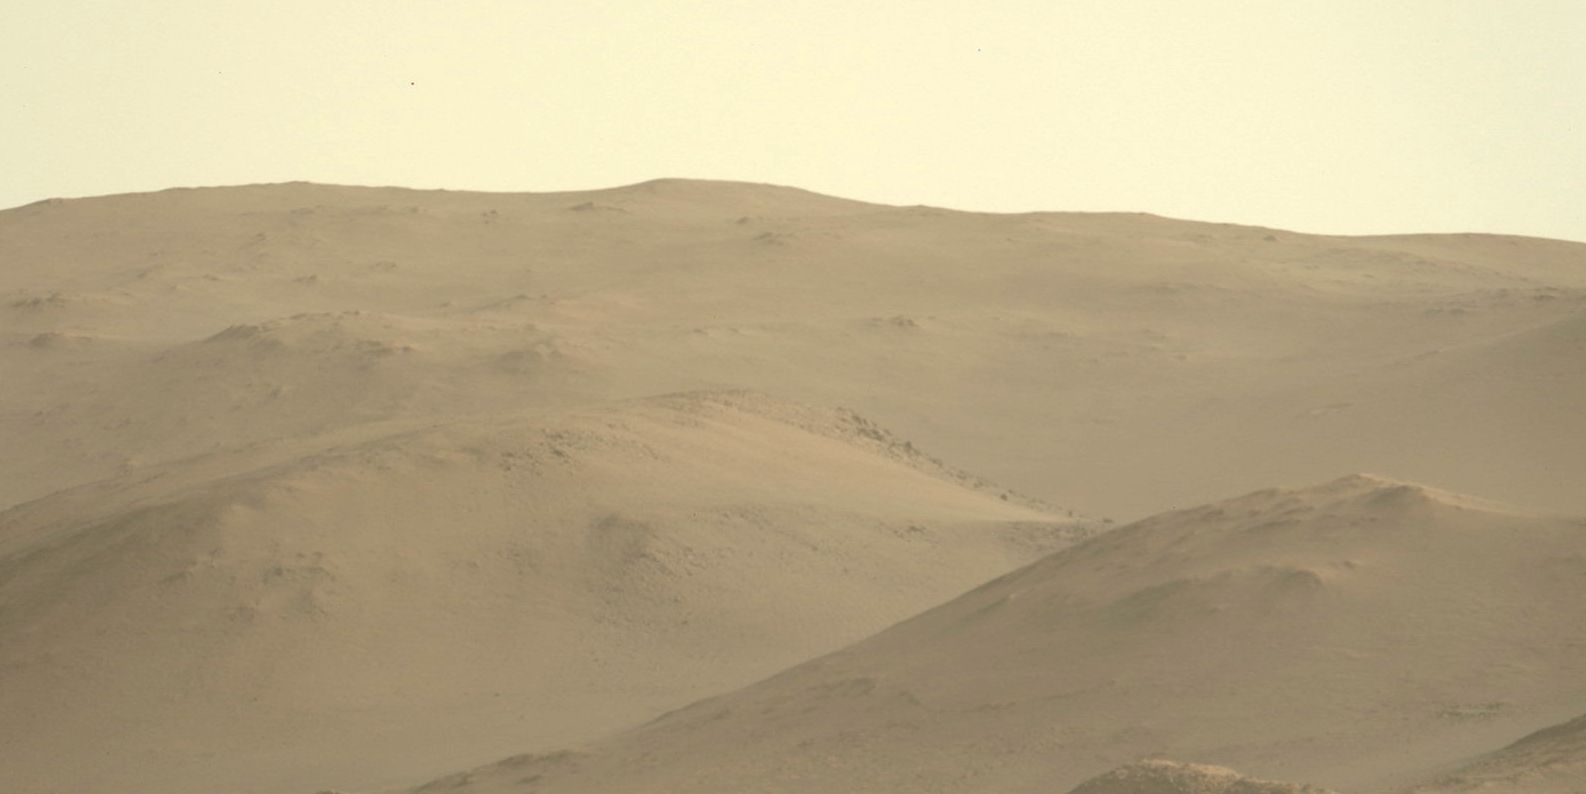 Image of Mars taken by NASA Perseverance rover